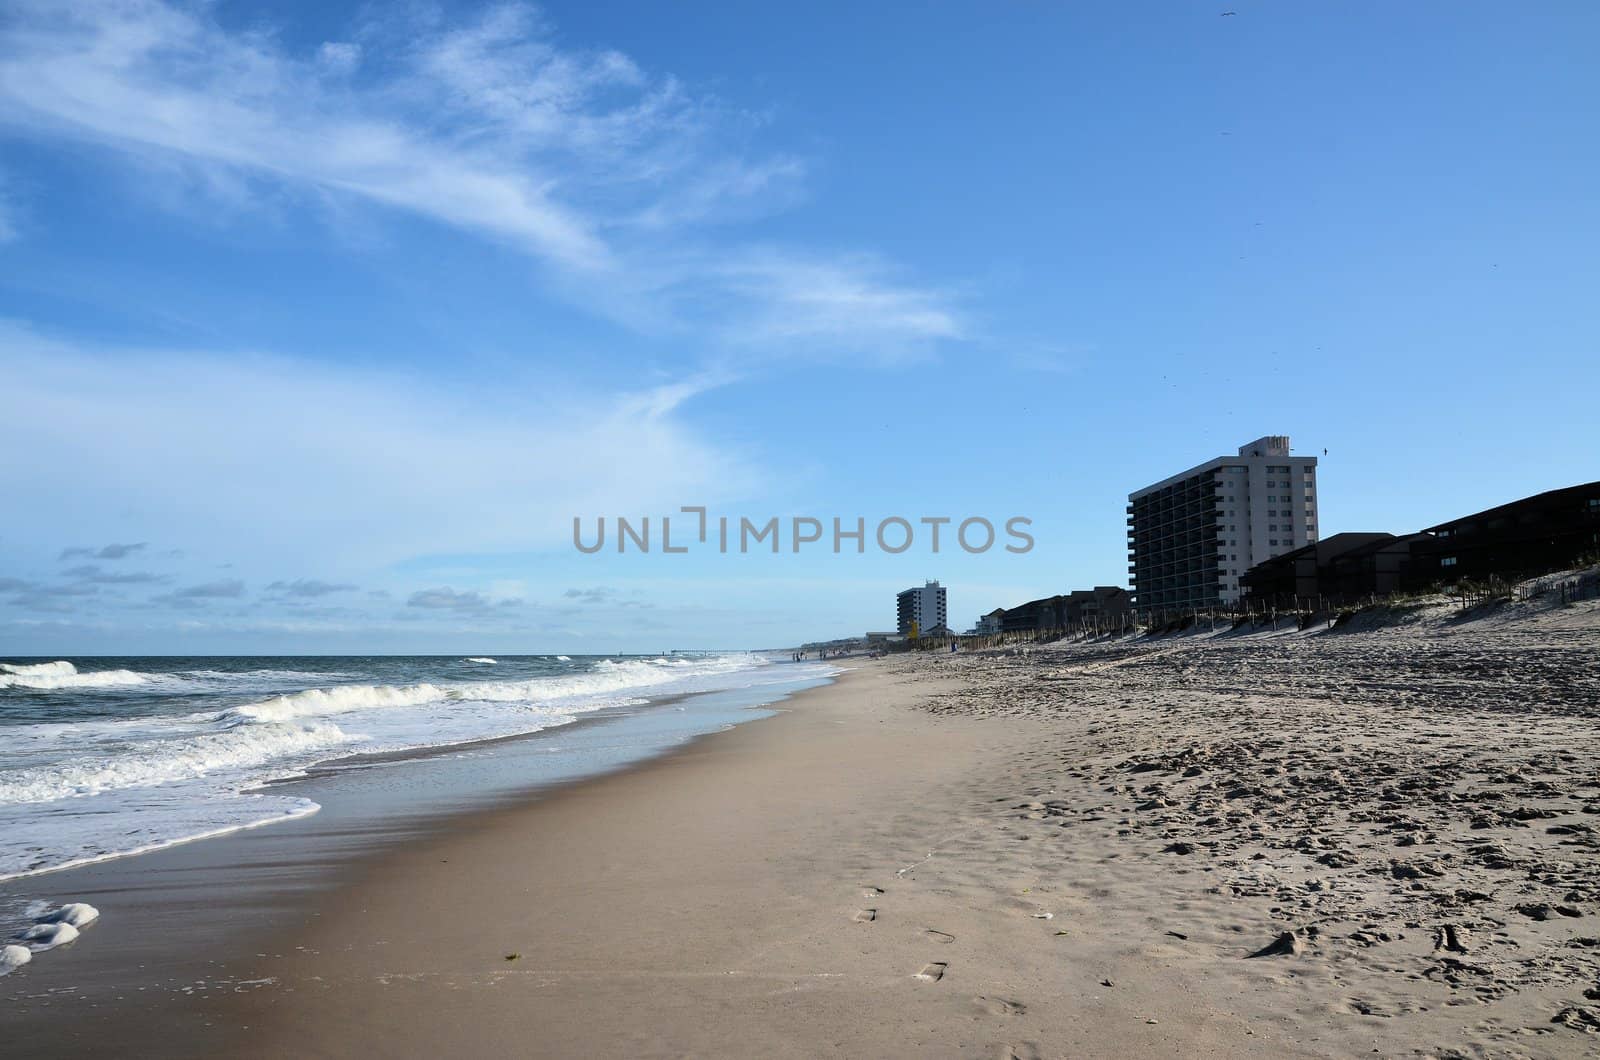 A view of the shore in North Carolina showing condos and surf.